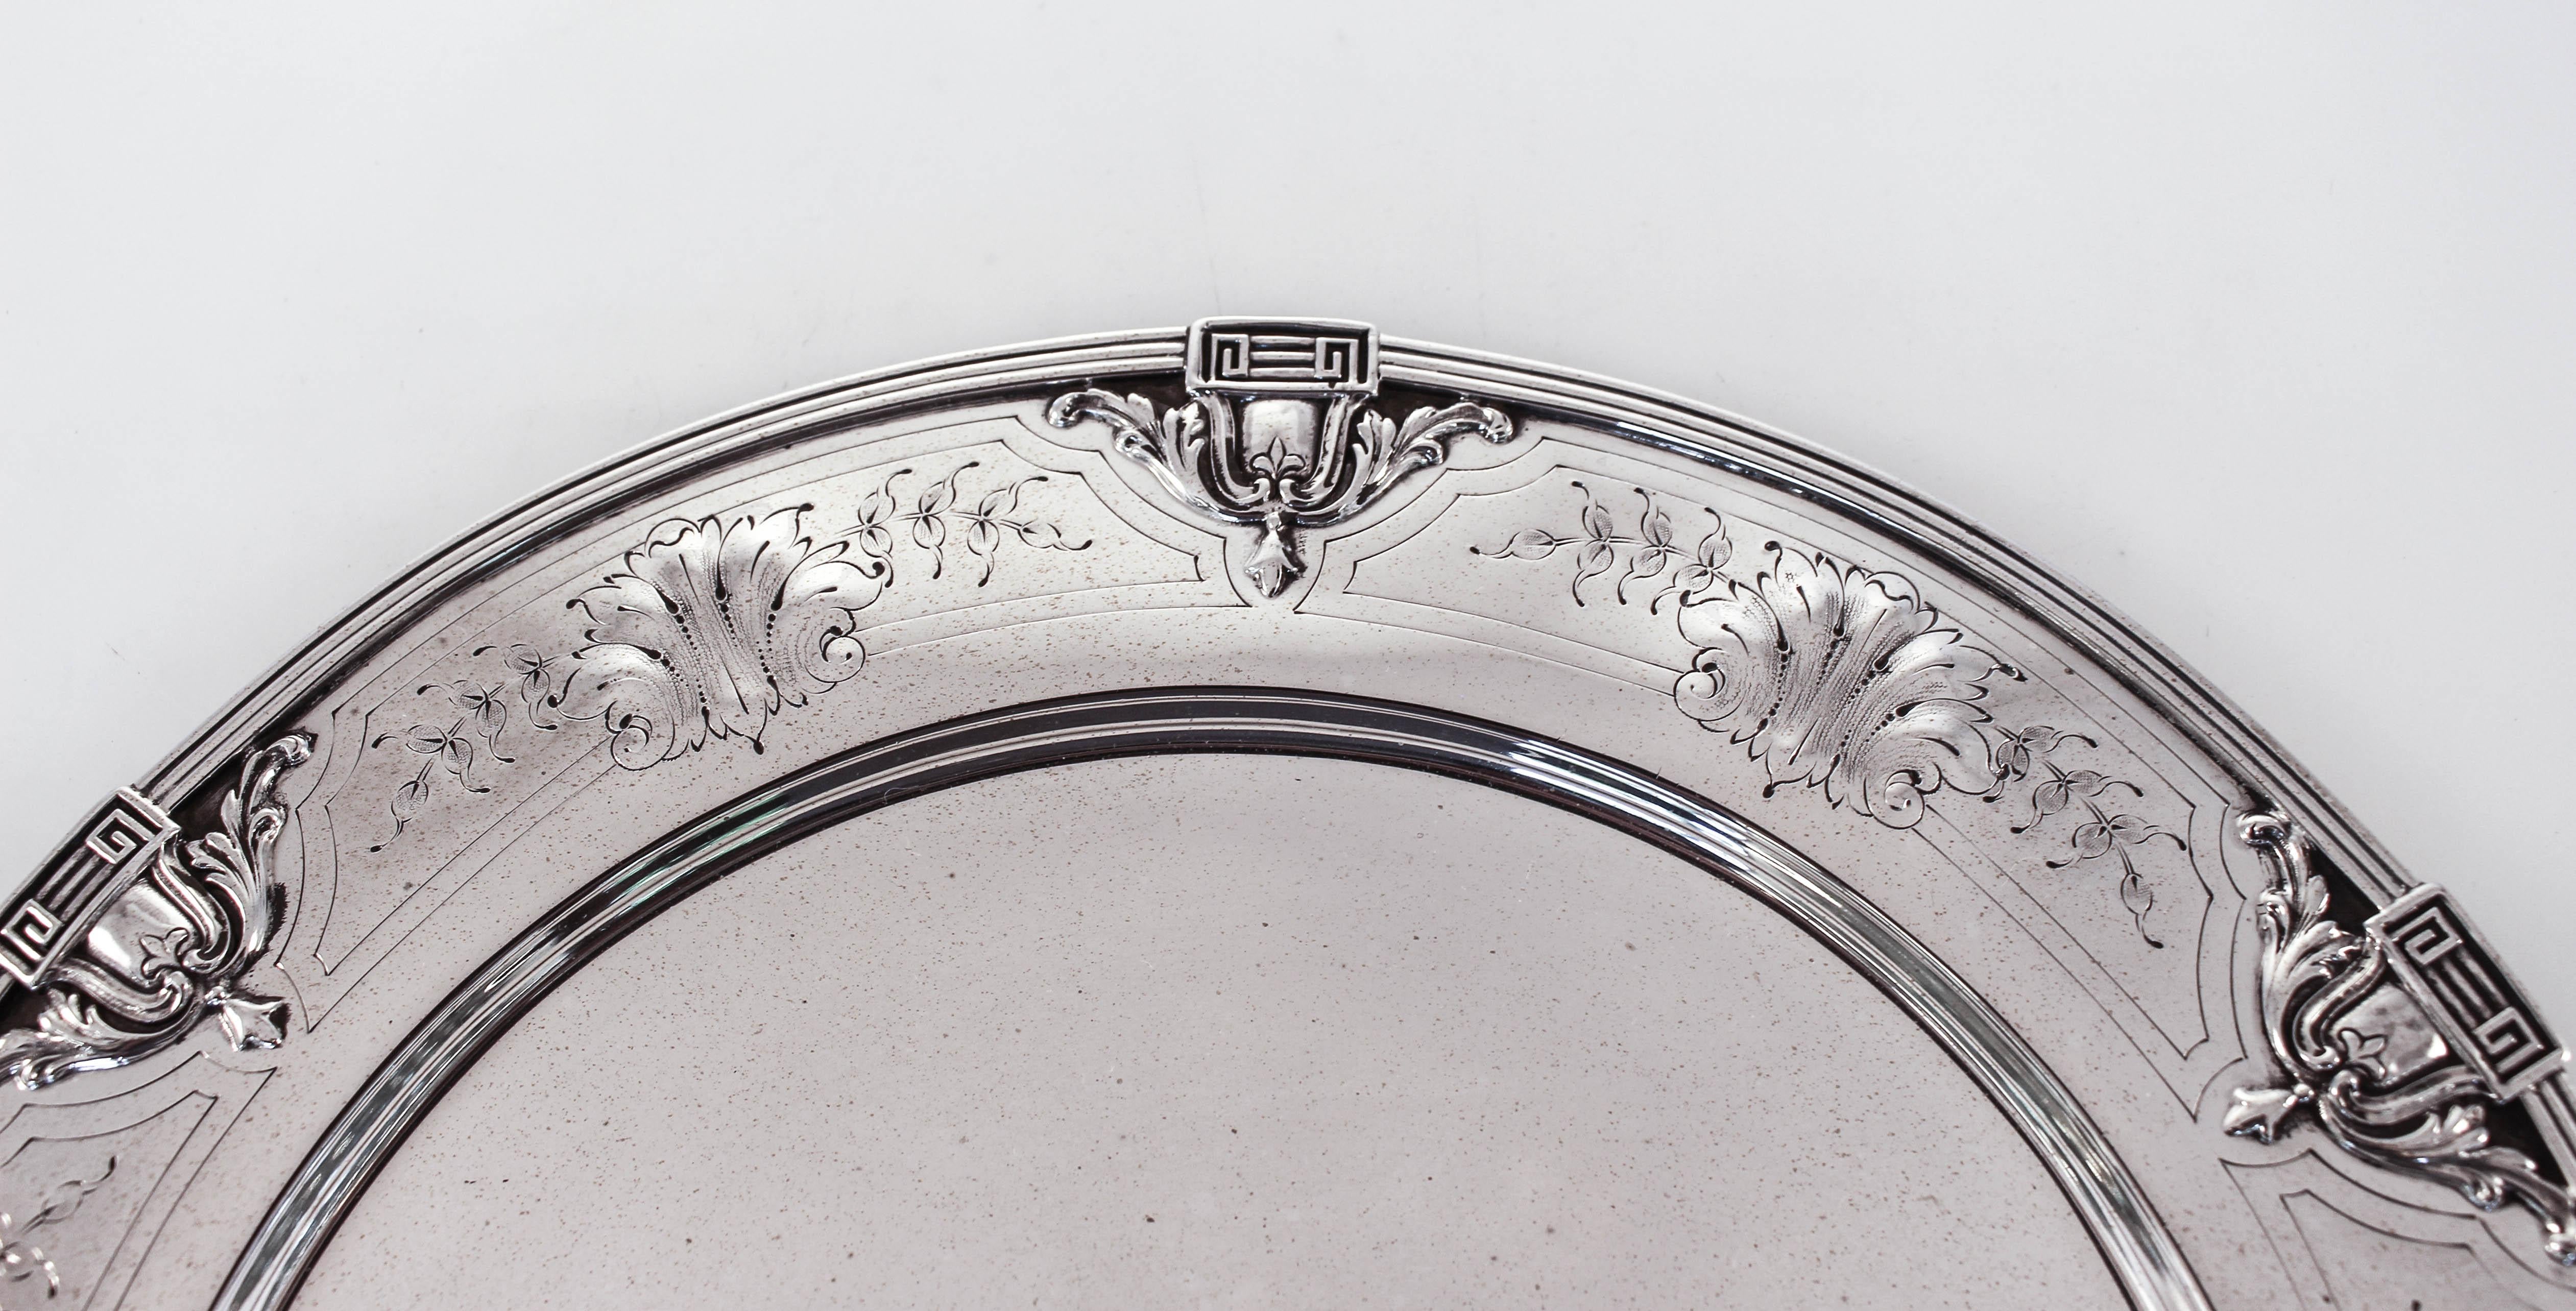 We are delighted to offer this sterling silver basket by the Baltimore Silver Company. The border is decorated with six raised medallions and in-between each there are etched flowers and garlands. The rim and handle have the same design. In the